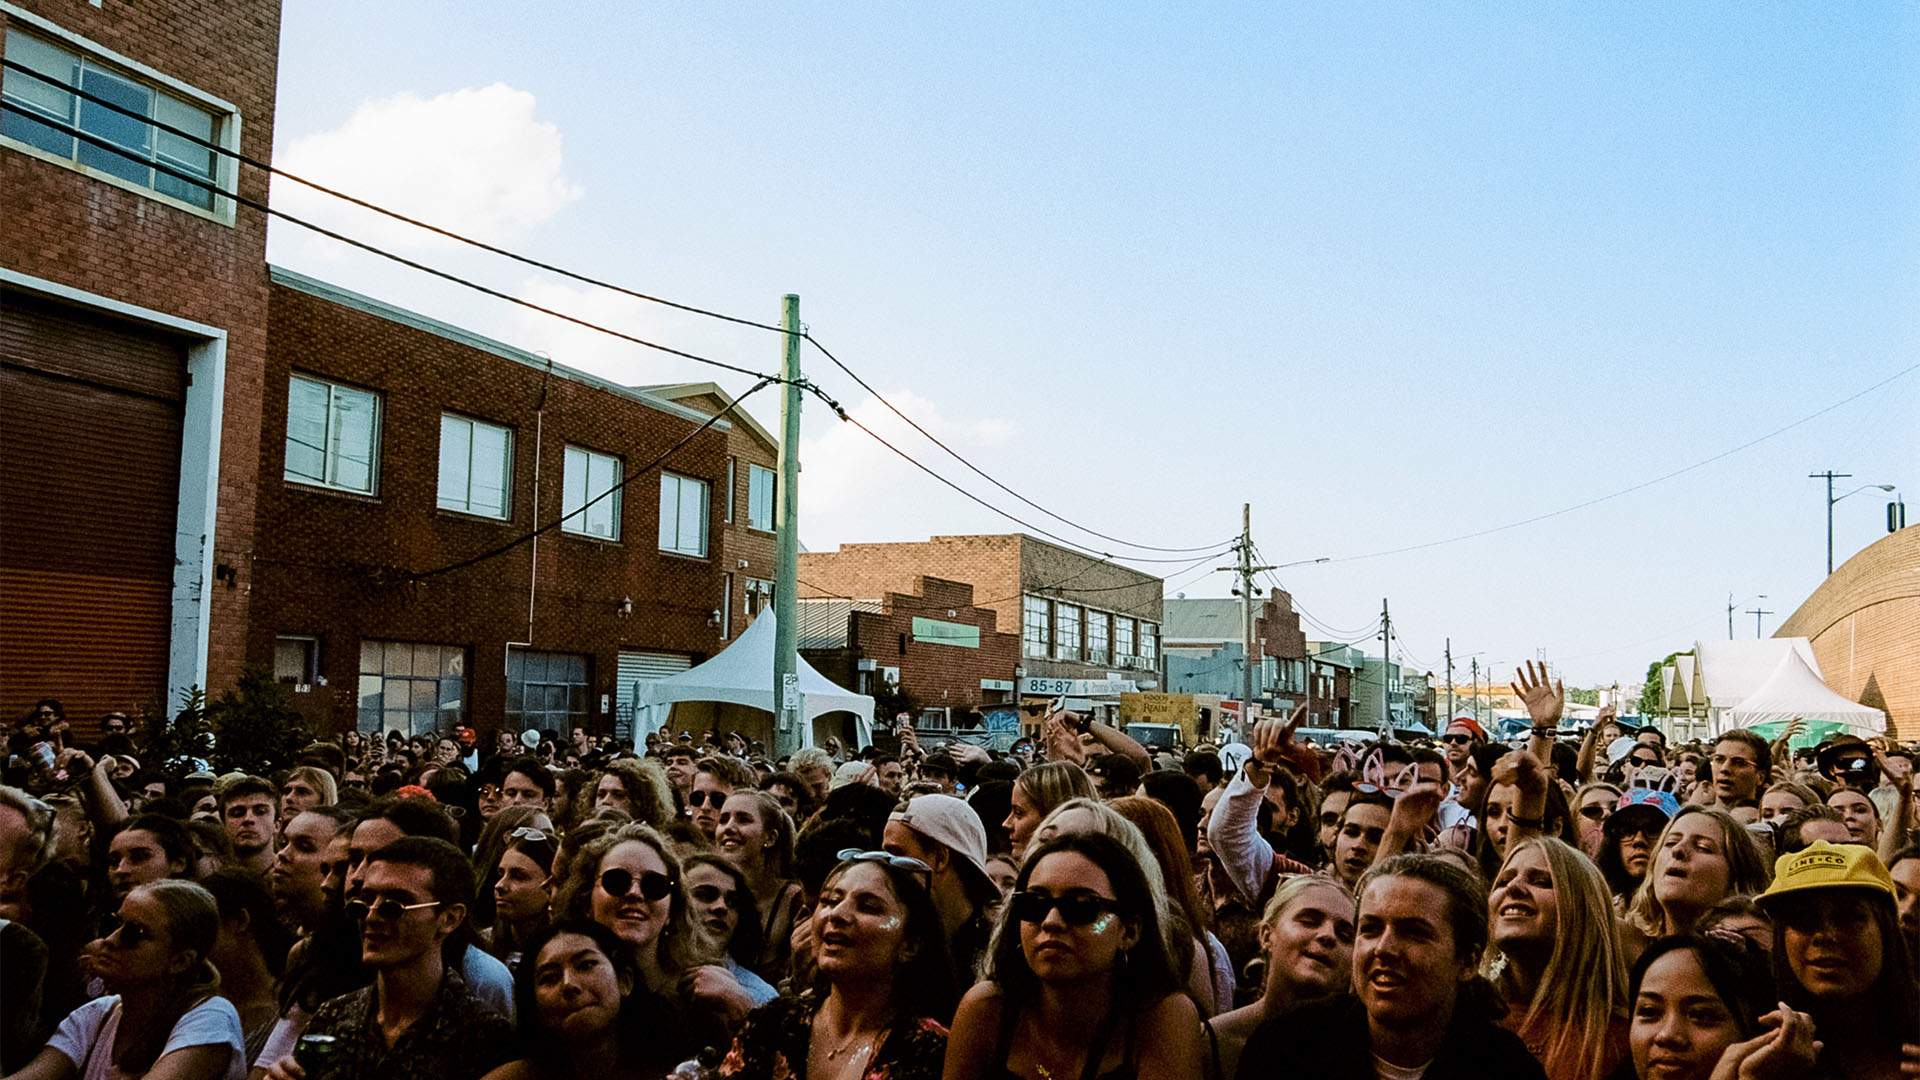 Marrickville Block Weekender Is the New Three-Day Festival Hitting the Inner West This Spring